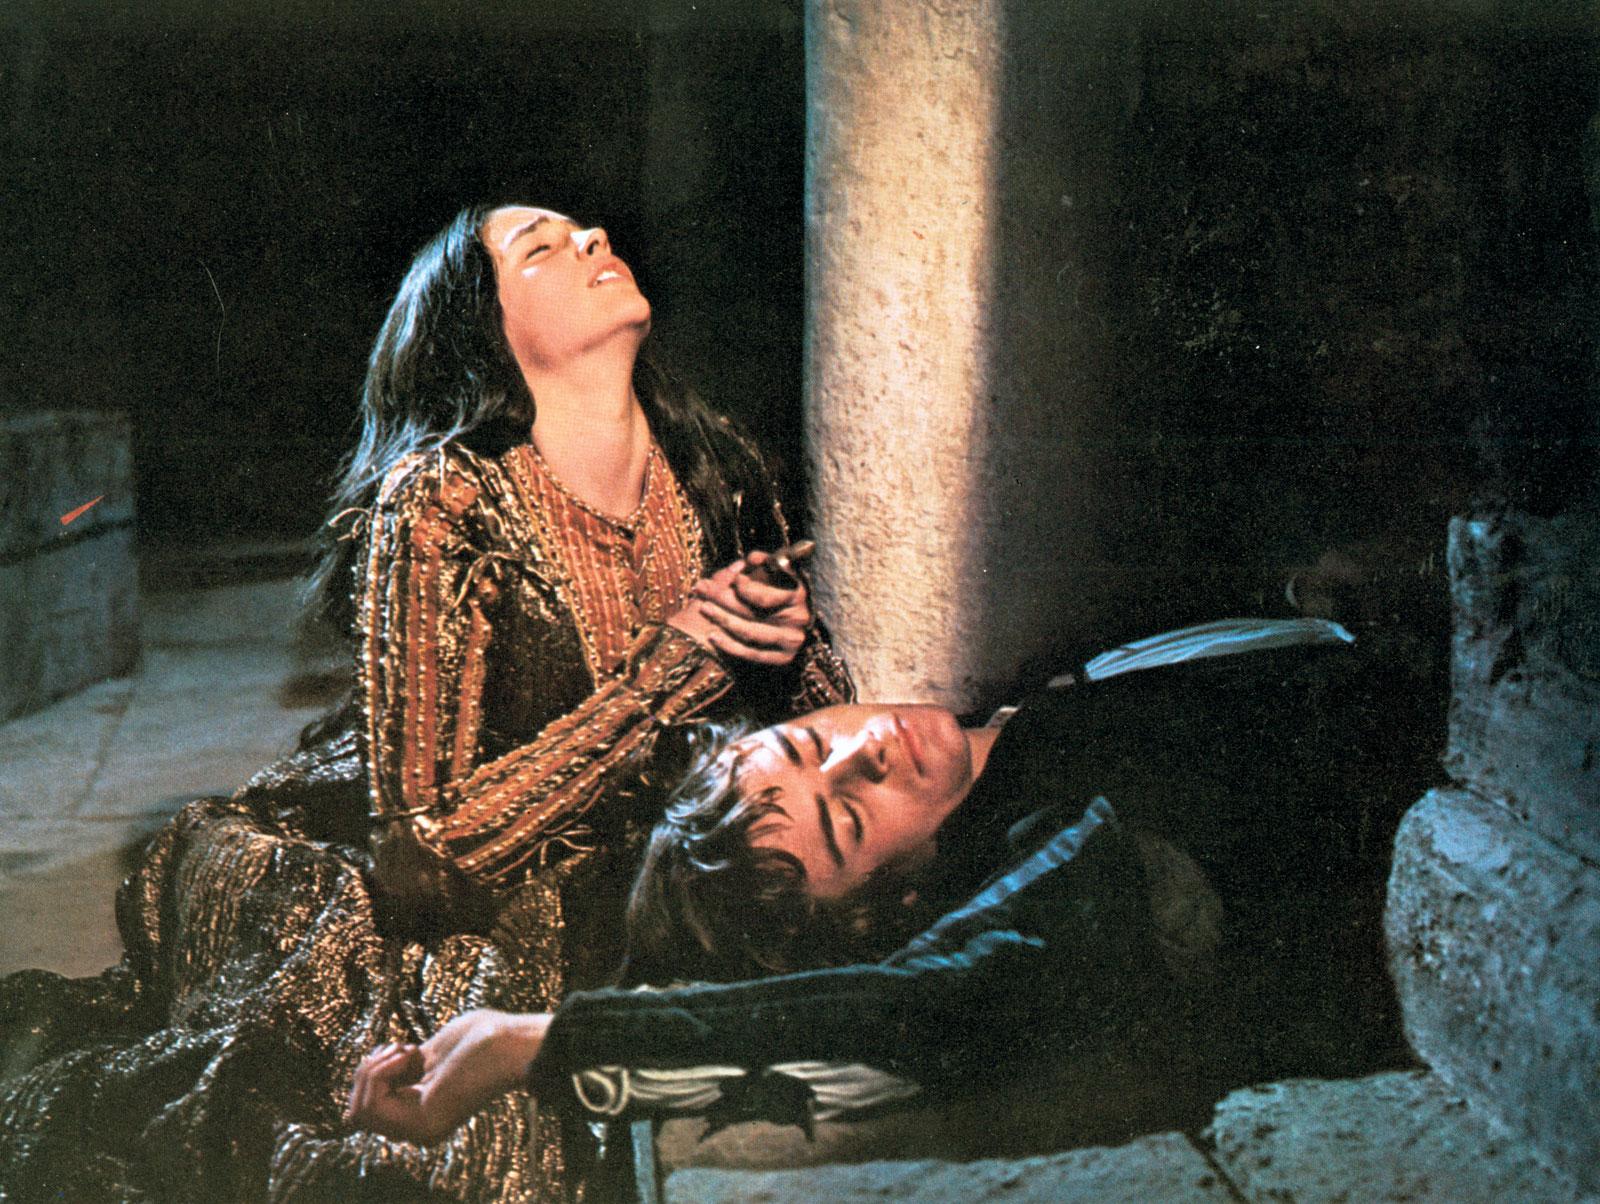 If You’re a Trivia Expert, Prove It by Getting at Least 15/20 in This Quiz romeo and juliet1